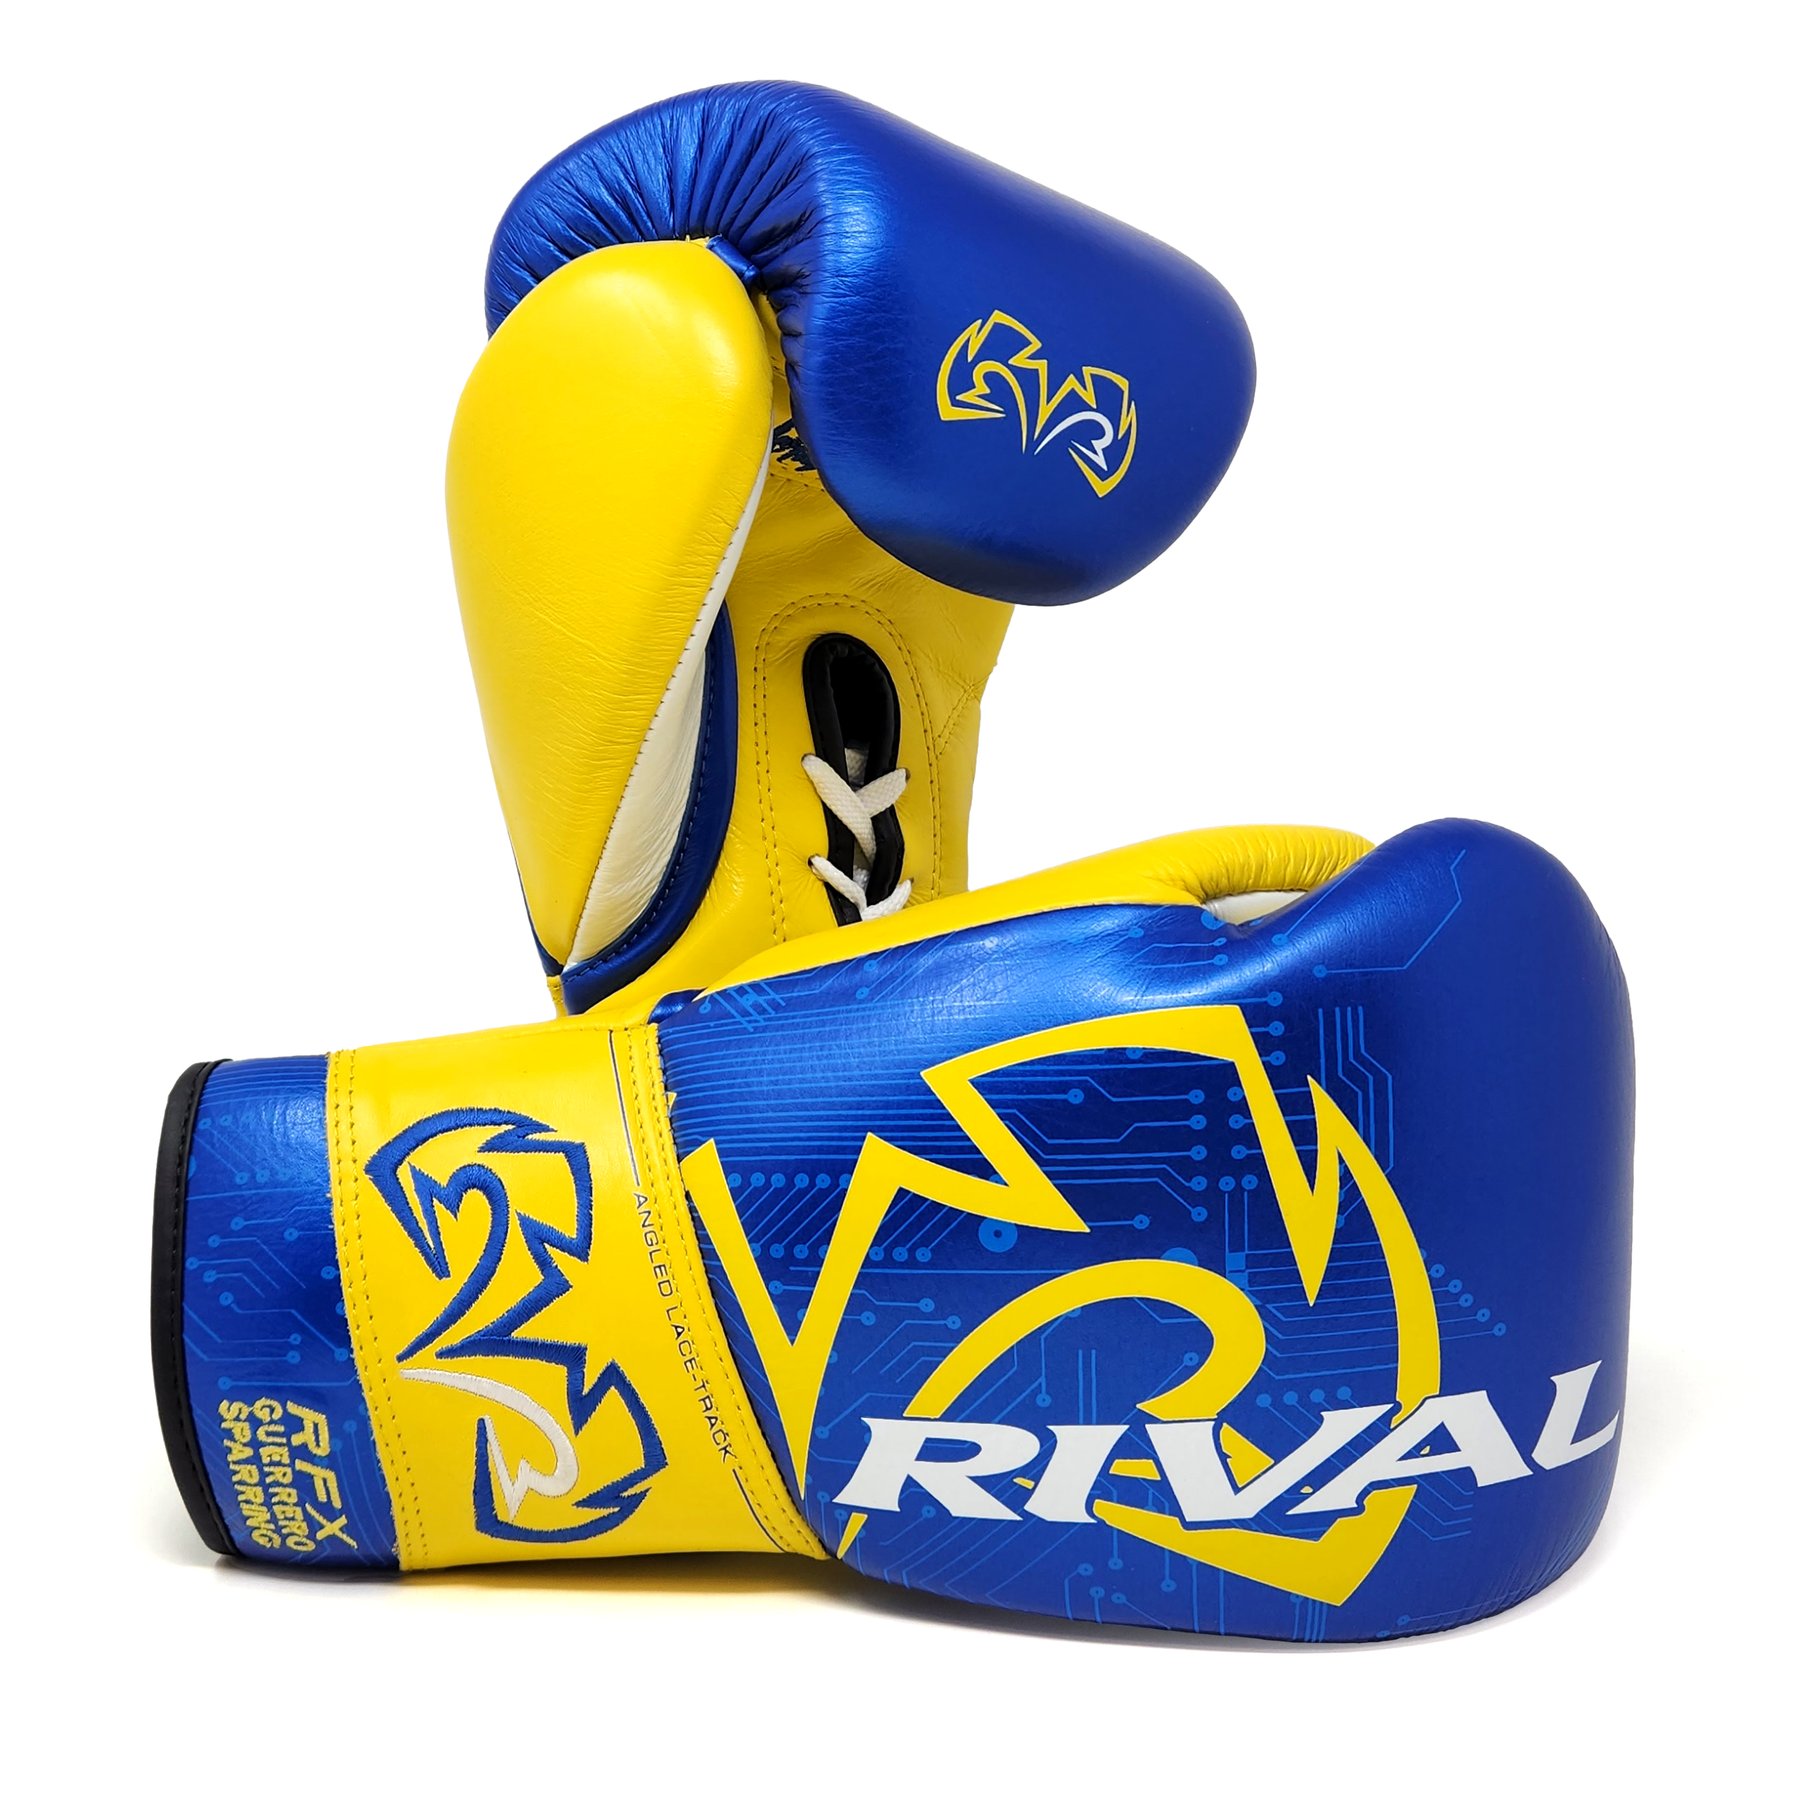 Boxing USA Edition Sparring Gloves Rival RFX-Guerrero – P4P Rival Gear